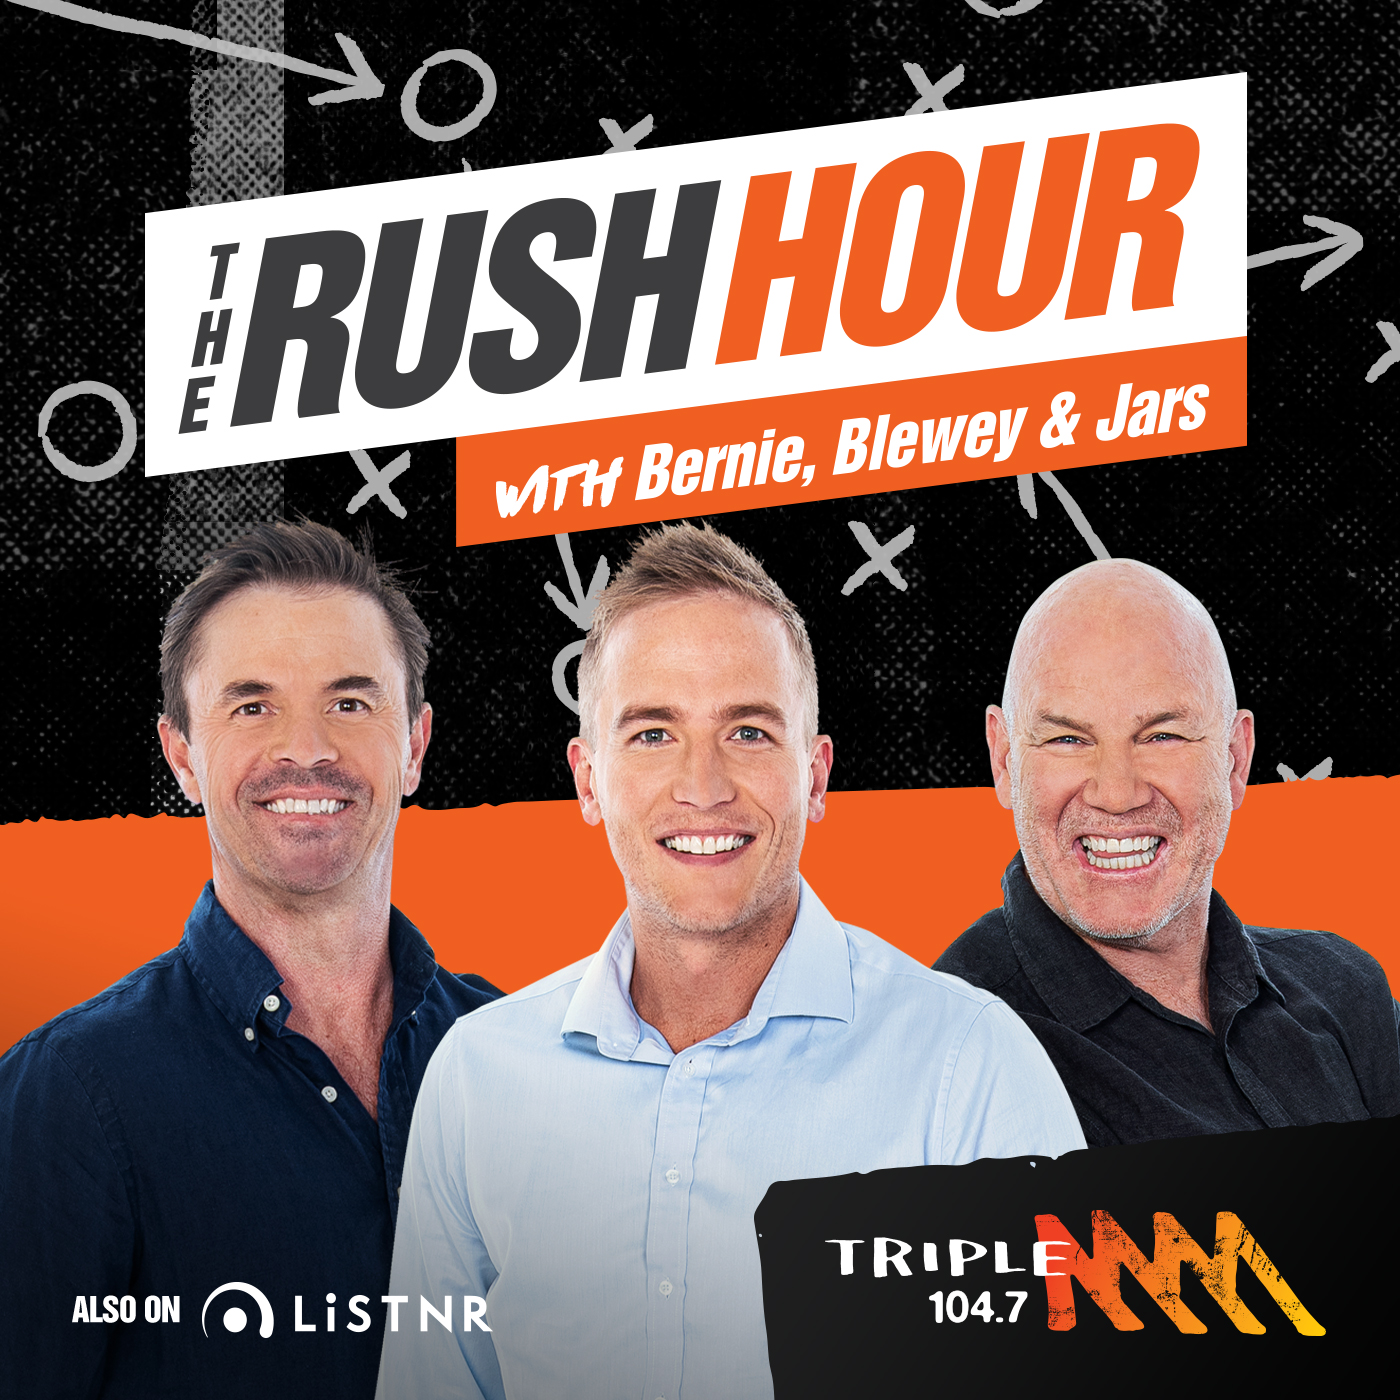 FULL SHOW - Ditt's Vs Bern, Cricket Fallout, Footy back early and Bernie's Final Facts - The Rush Hour with Bernie, Blewey & Jars.